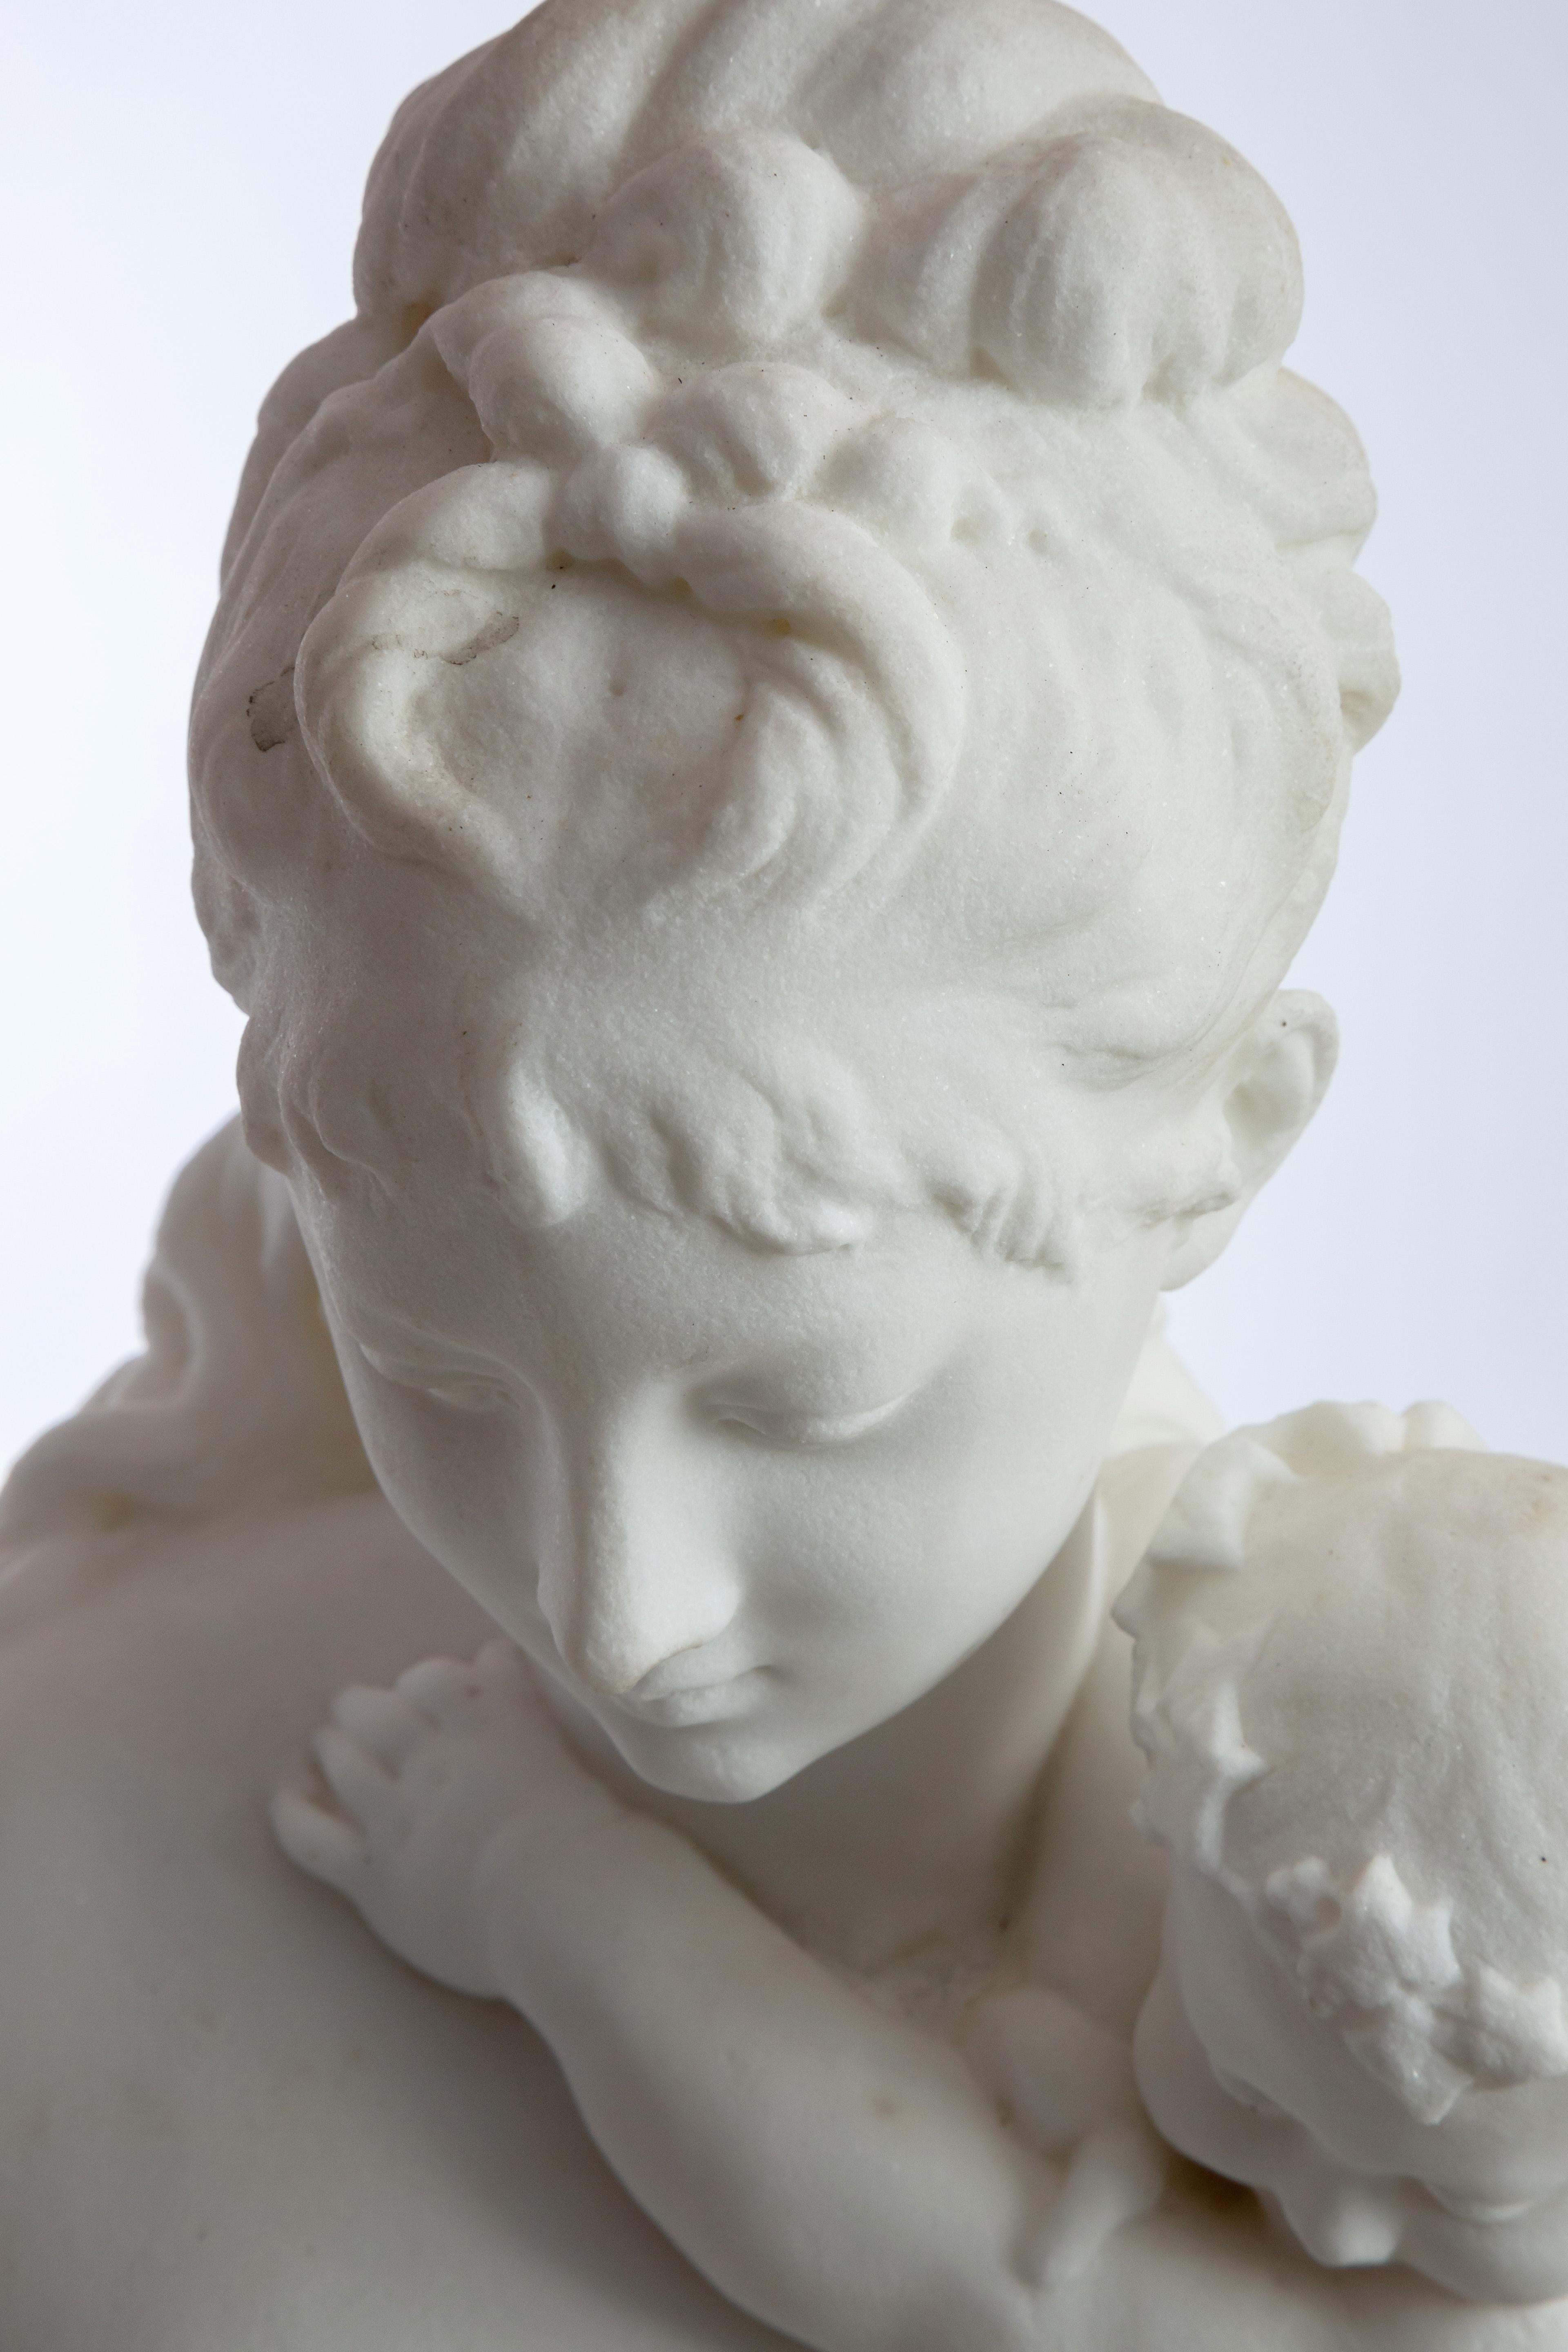 Le Retour des Champs ‘Return from the Harvest’ Carrara Marble, Signed and Dated 7